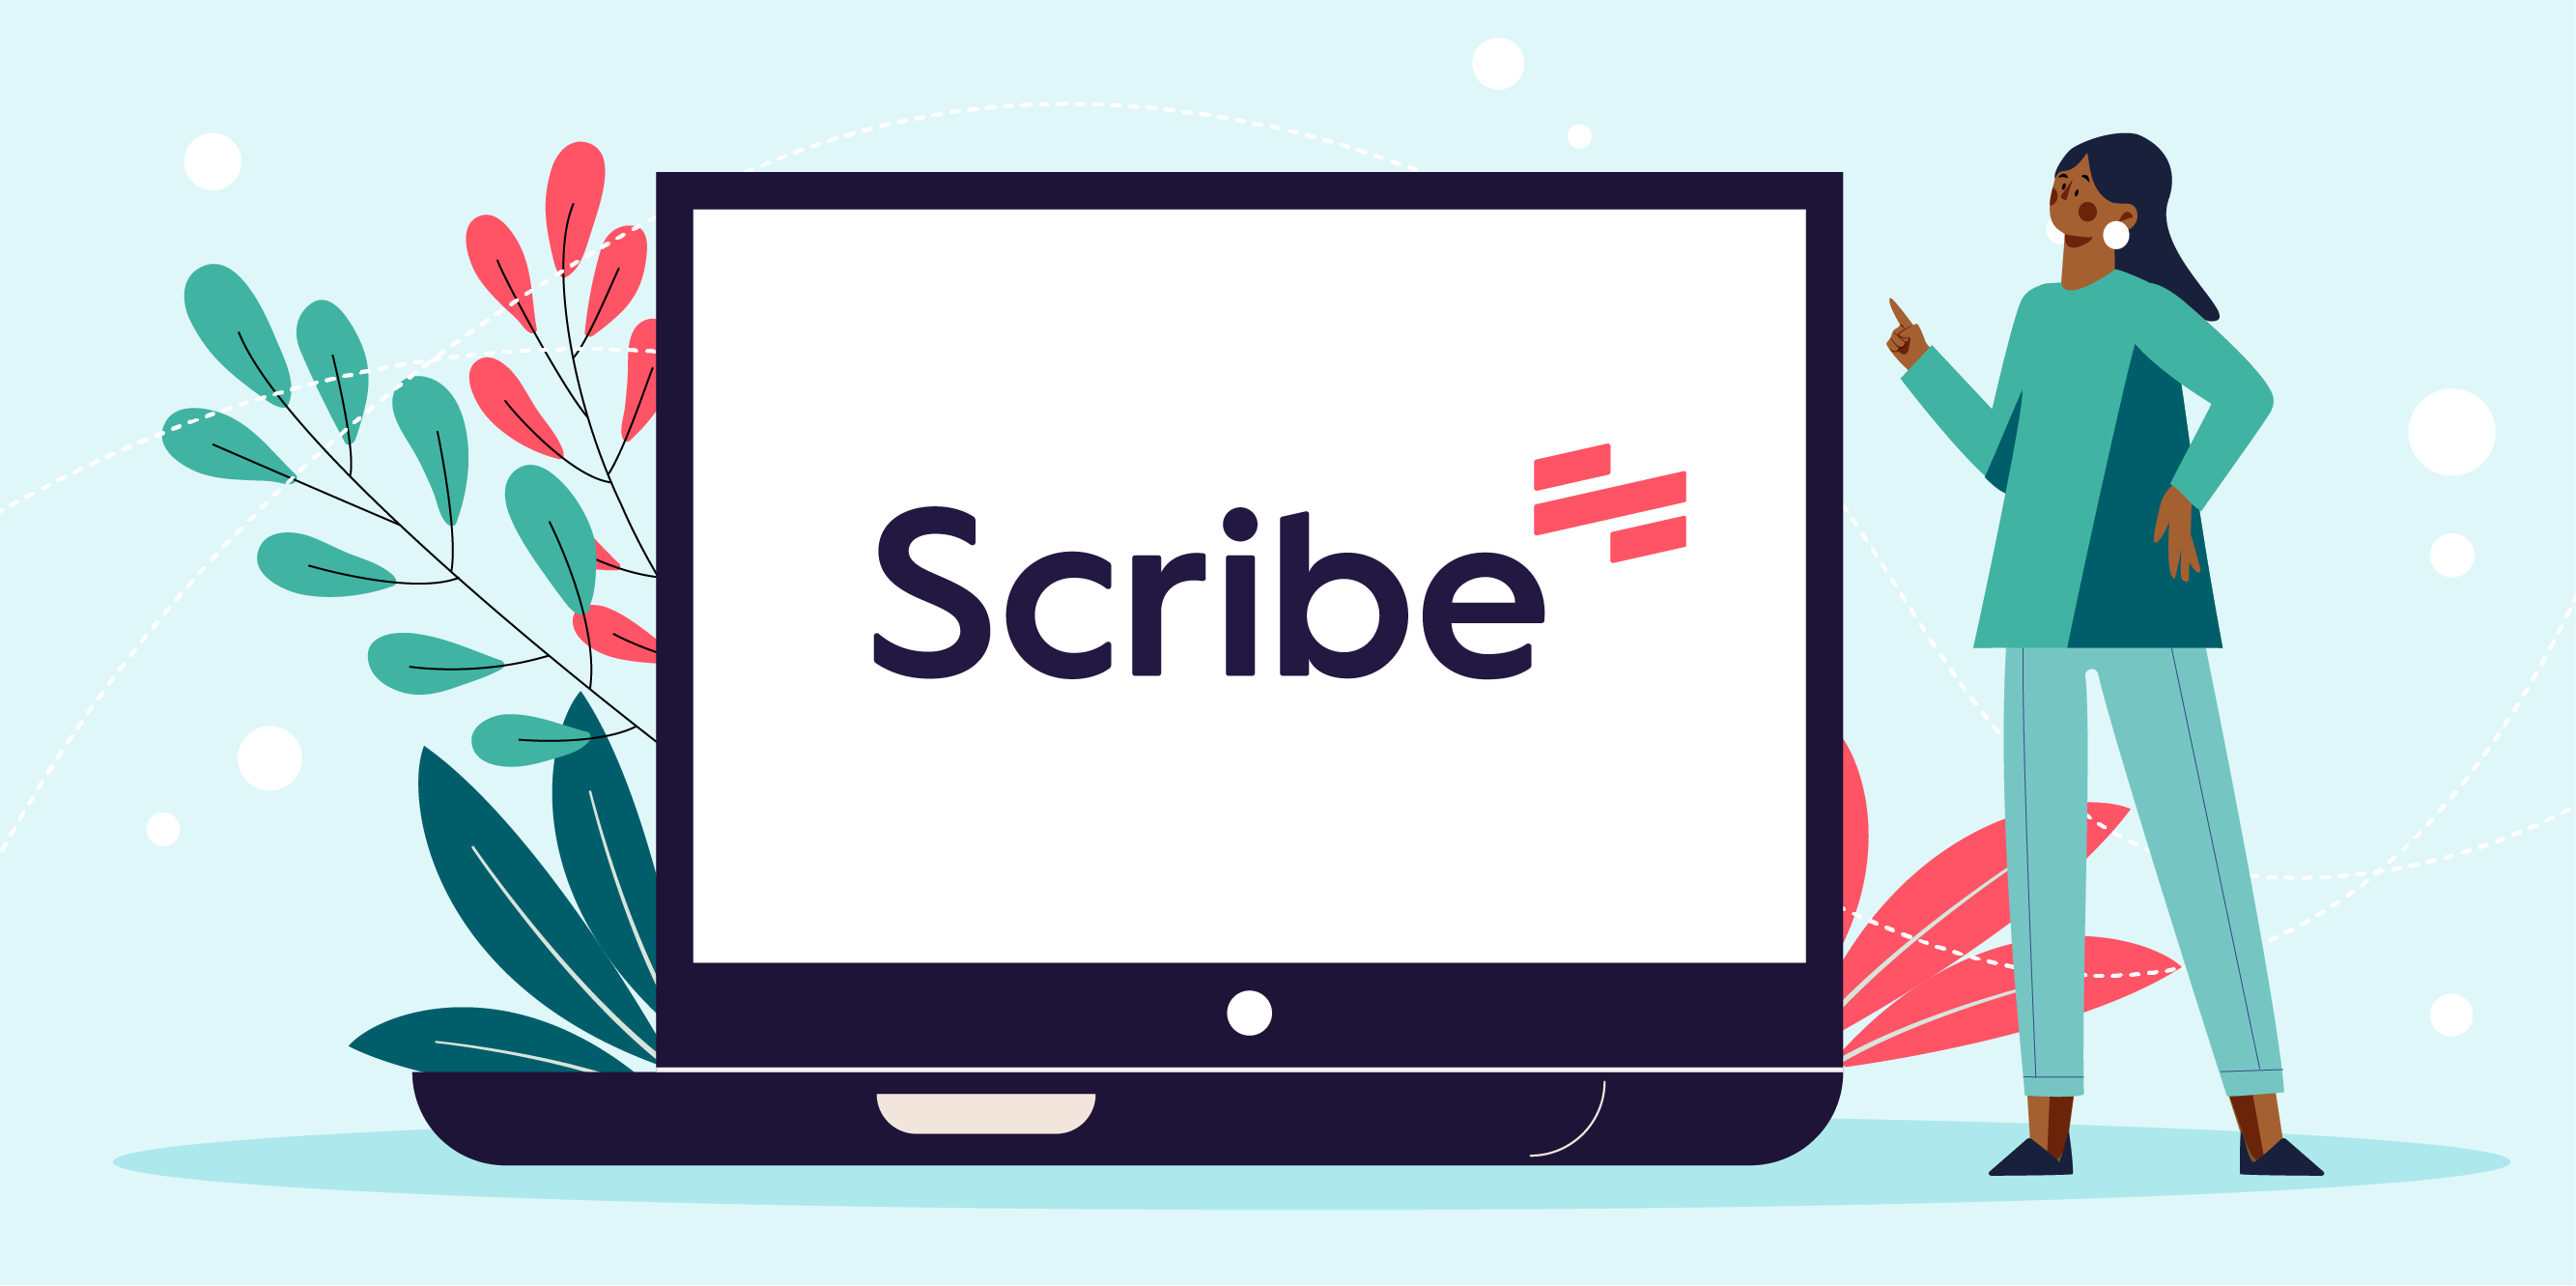 Scribe: A Short Guide